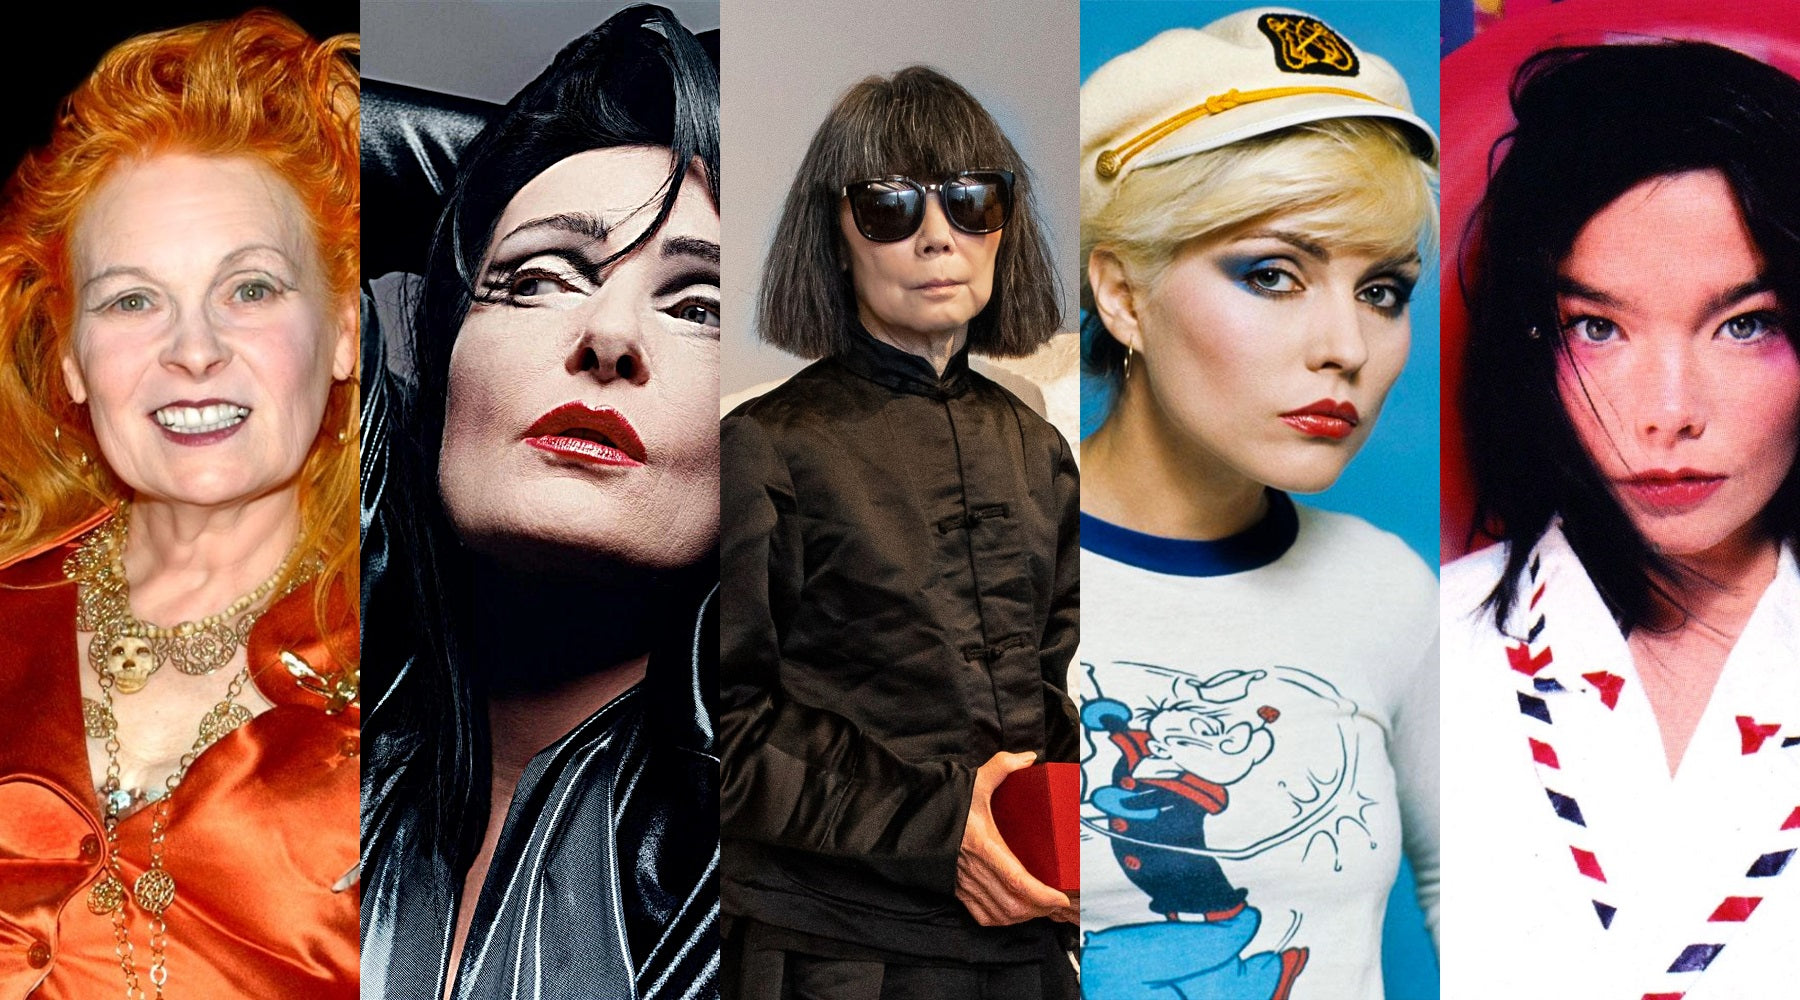 Collage of photos, featuring (in this order): Vivienne Westwood, Siouxsie Sioux, Rei Kawakubo, Debbie Harry, and Bjork.